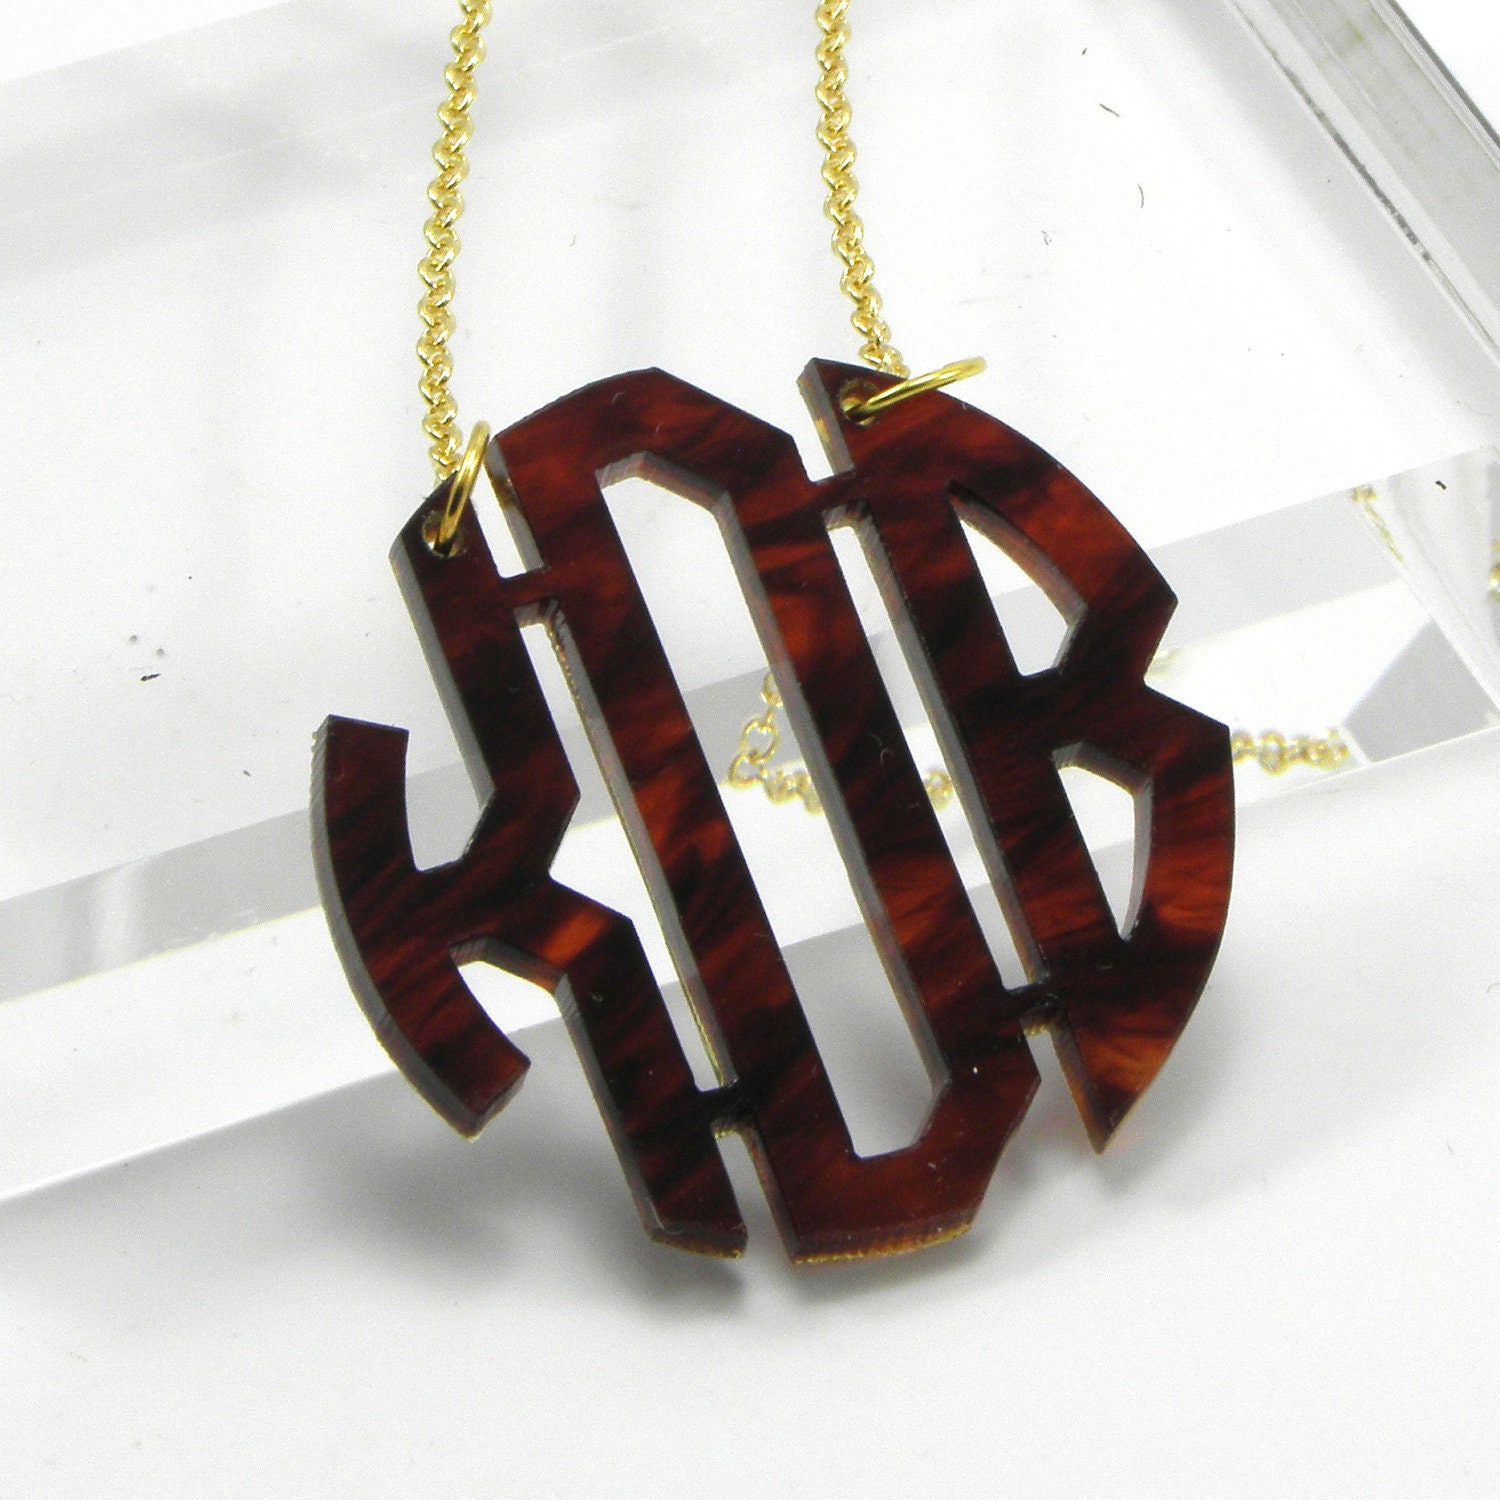 Tortoise Monogram Necklace - Gifts for Bridesmaid - Personalized Custom Laser Cut Acrylic Jewelry